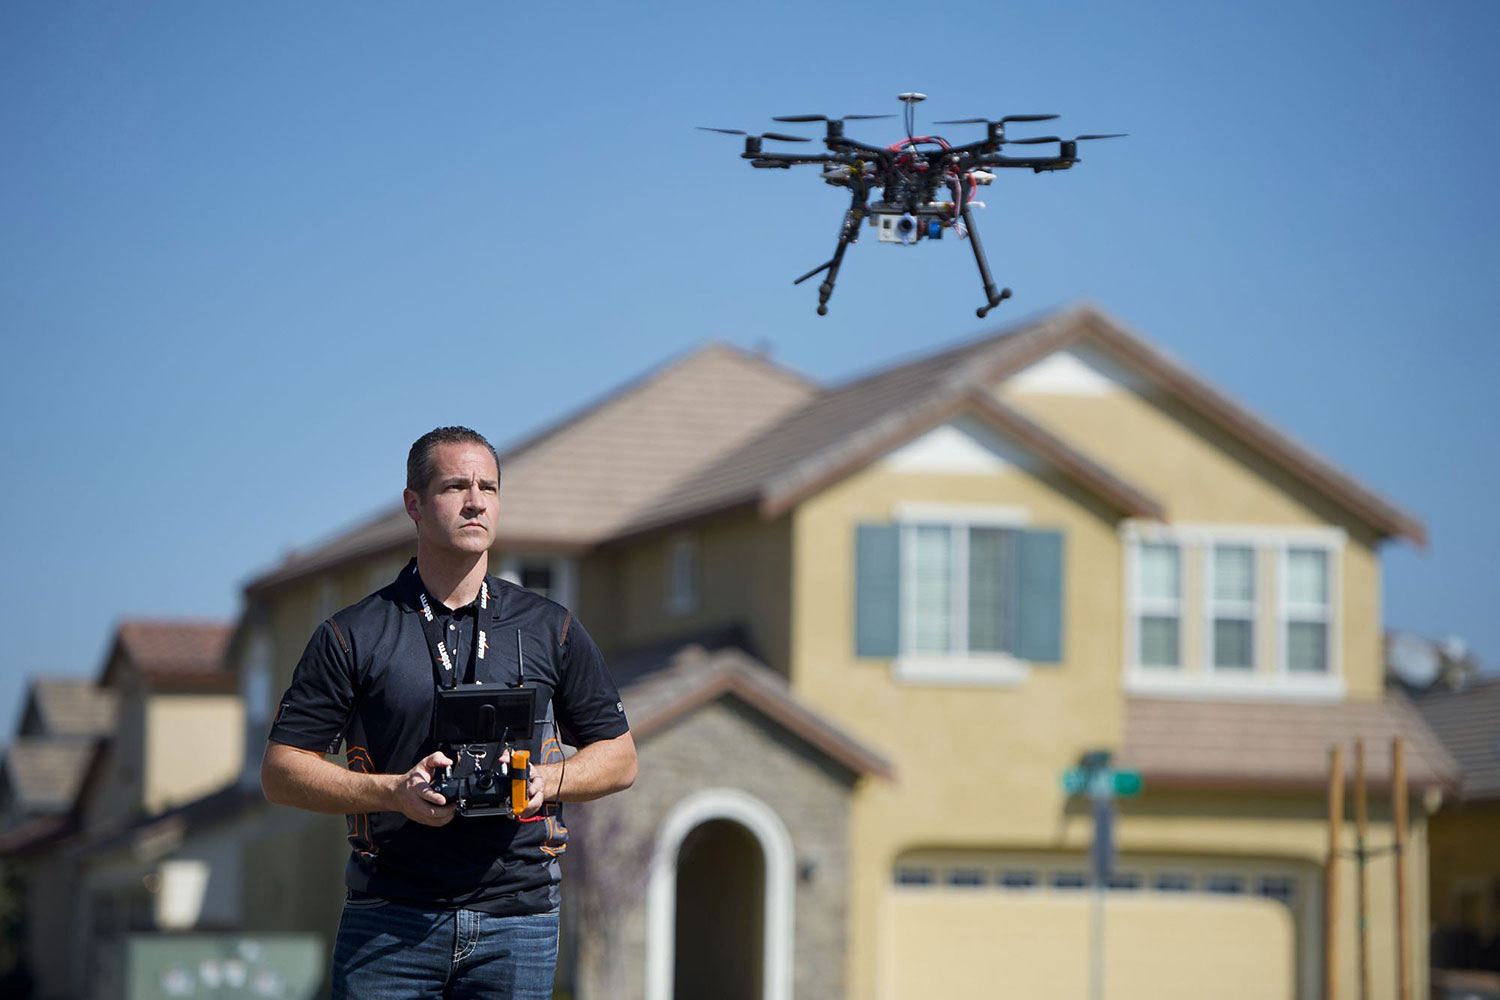 Christopher Brown, co-owner of Next New Homes Group, uses his multi-rotor helicopter drone to take aerial video of a home in Sacramento, Calif., on Feb. 25, 2014.